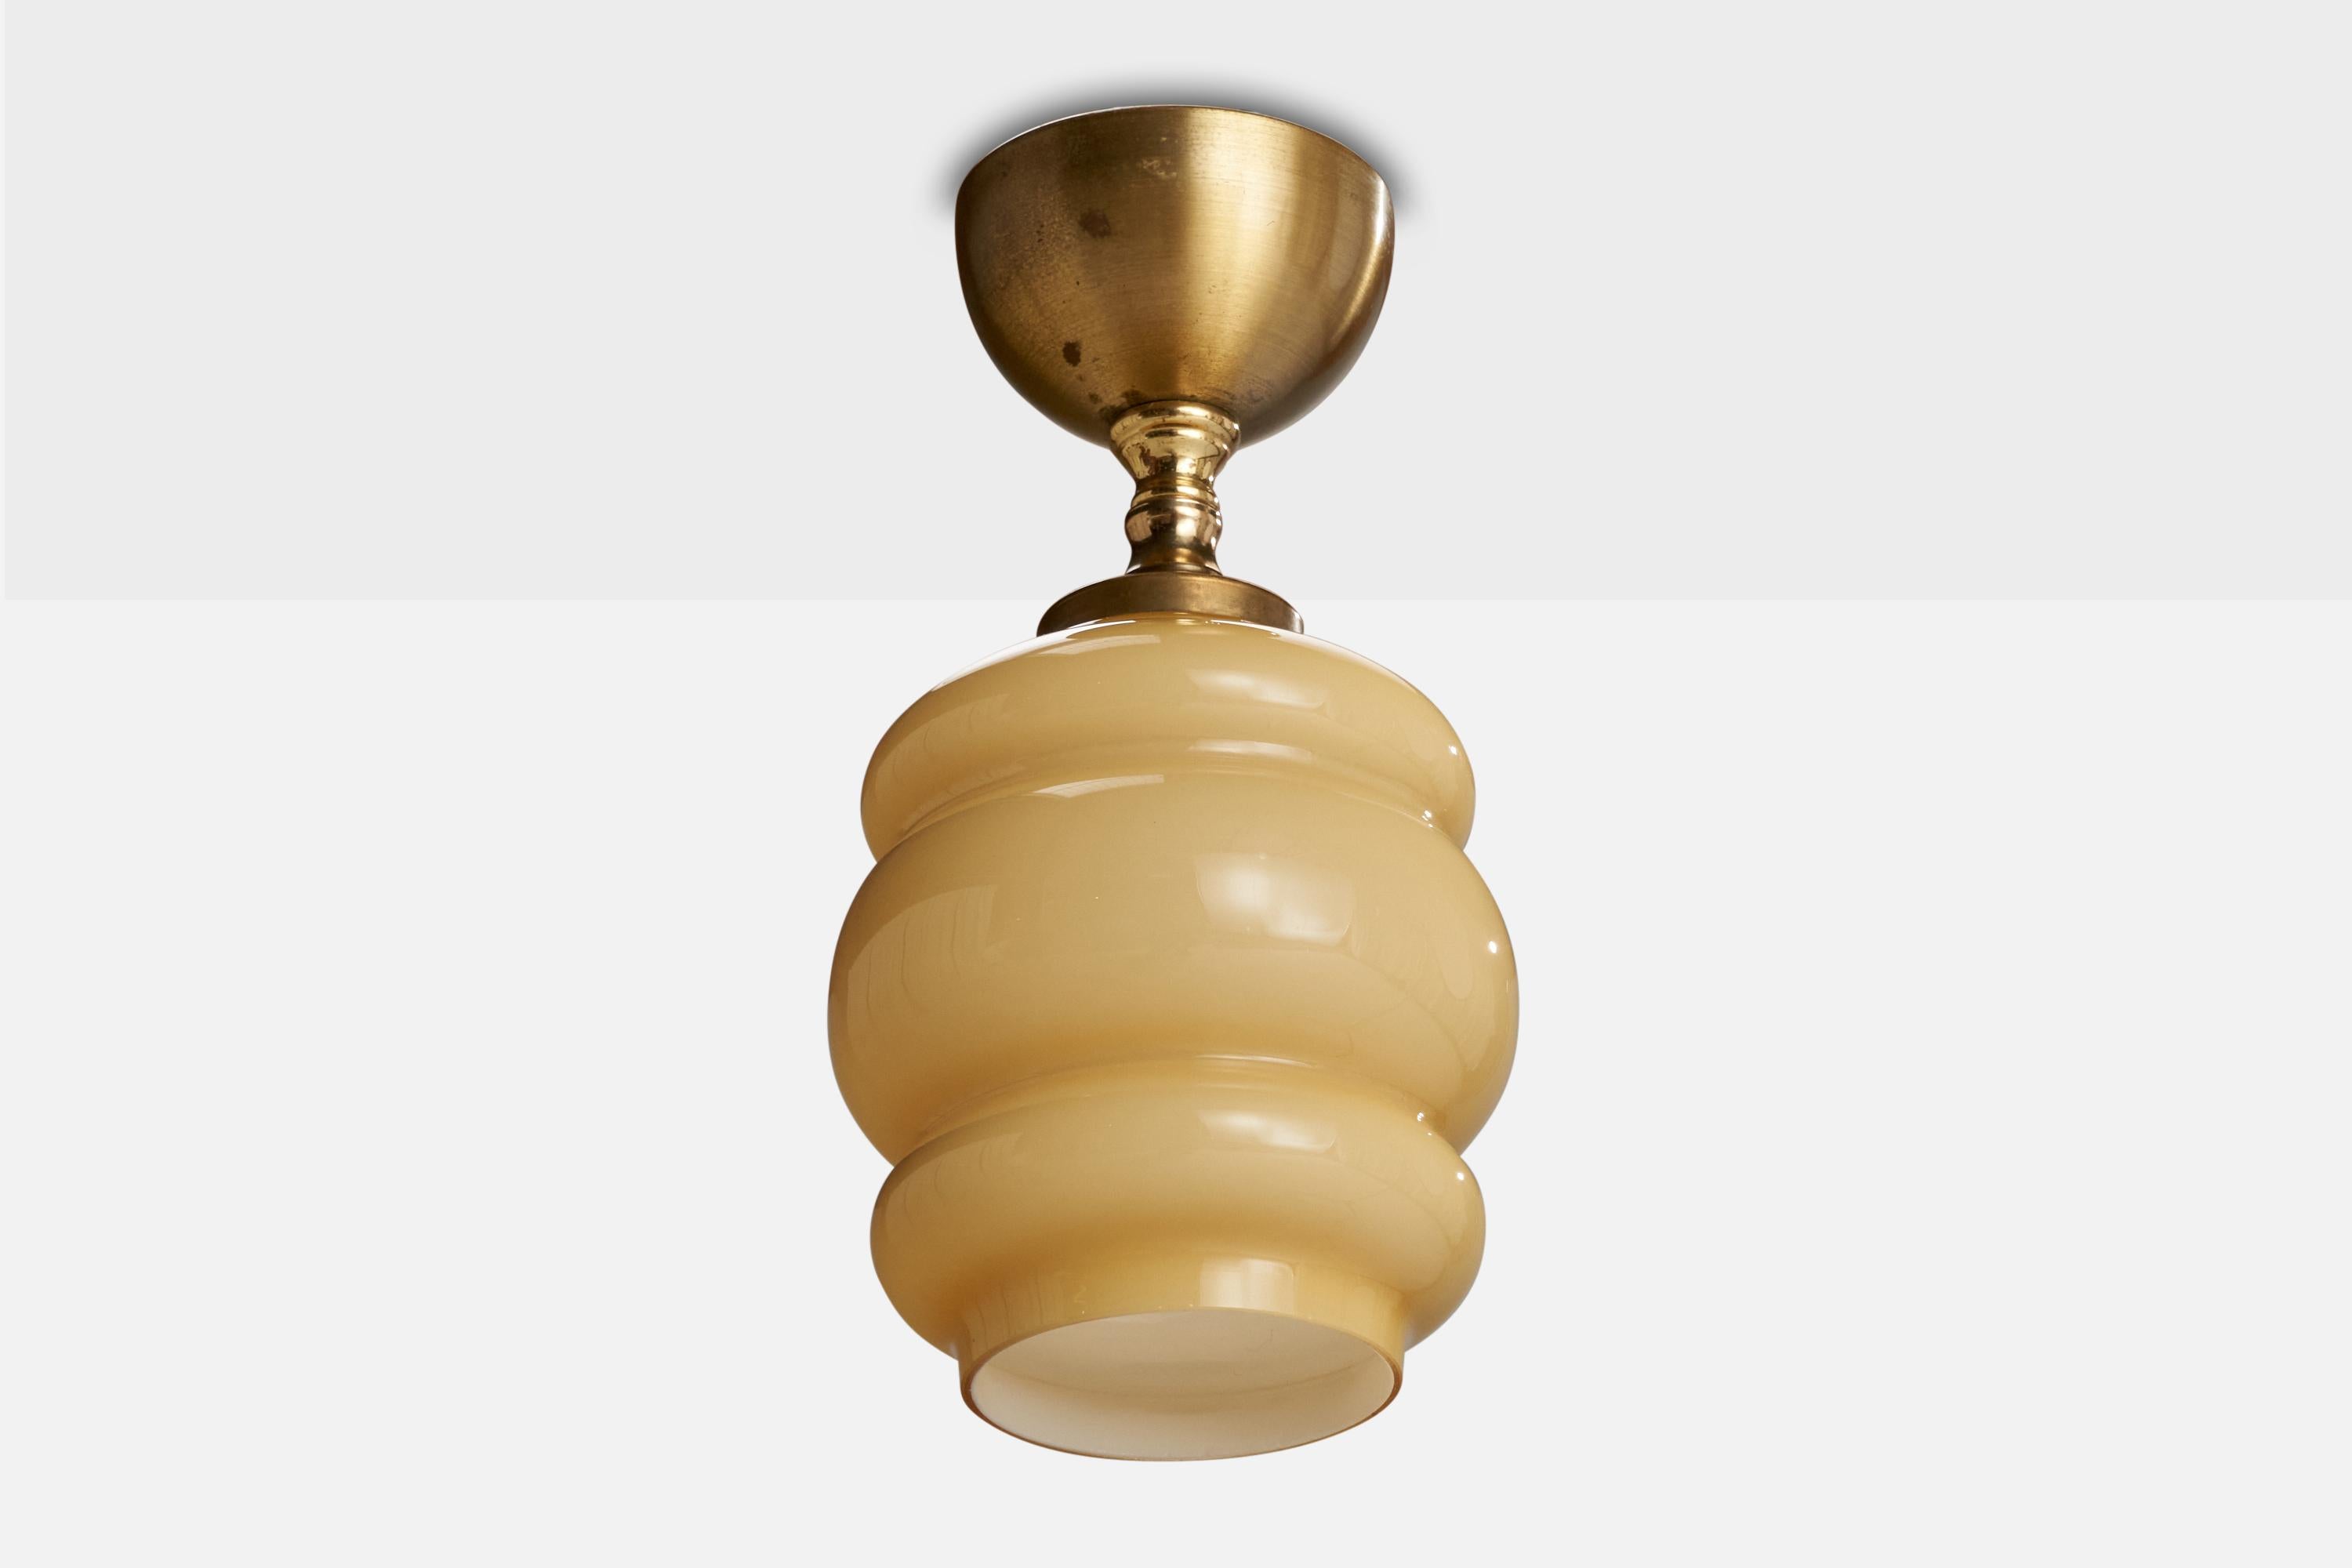 A brass and beige glass pendant light designed and produced in Sweden, c. 1950s.

Dimensions of canopy (inches): 3.65” H x 1.78” Diameter
Socket takes standard E-26 bulbs. 1 socket.There is no maximum wattage stated on the fixture. All lighting will